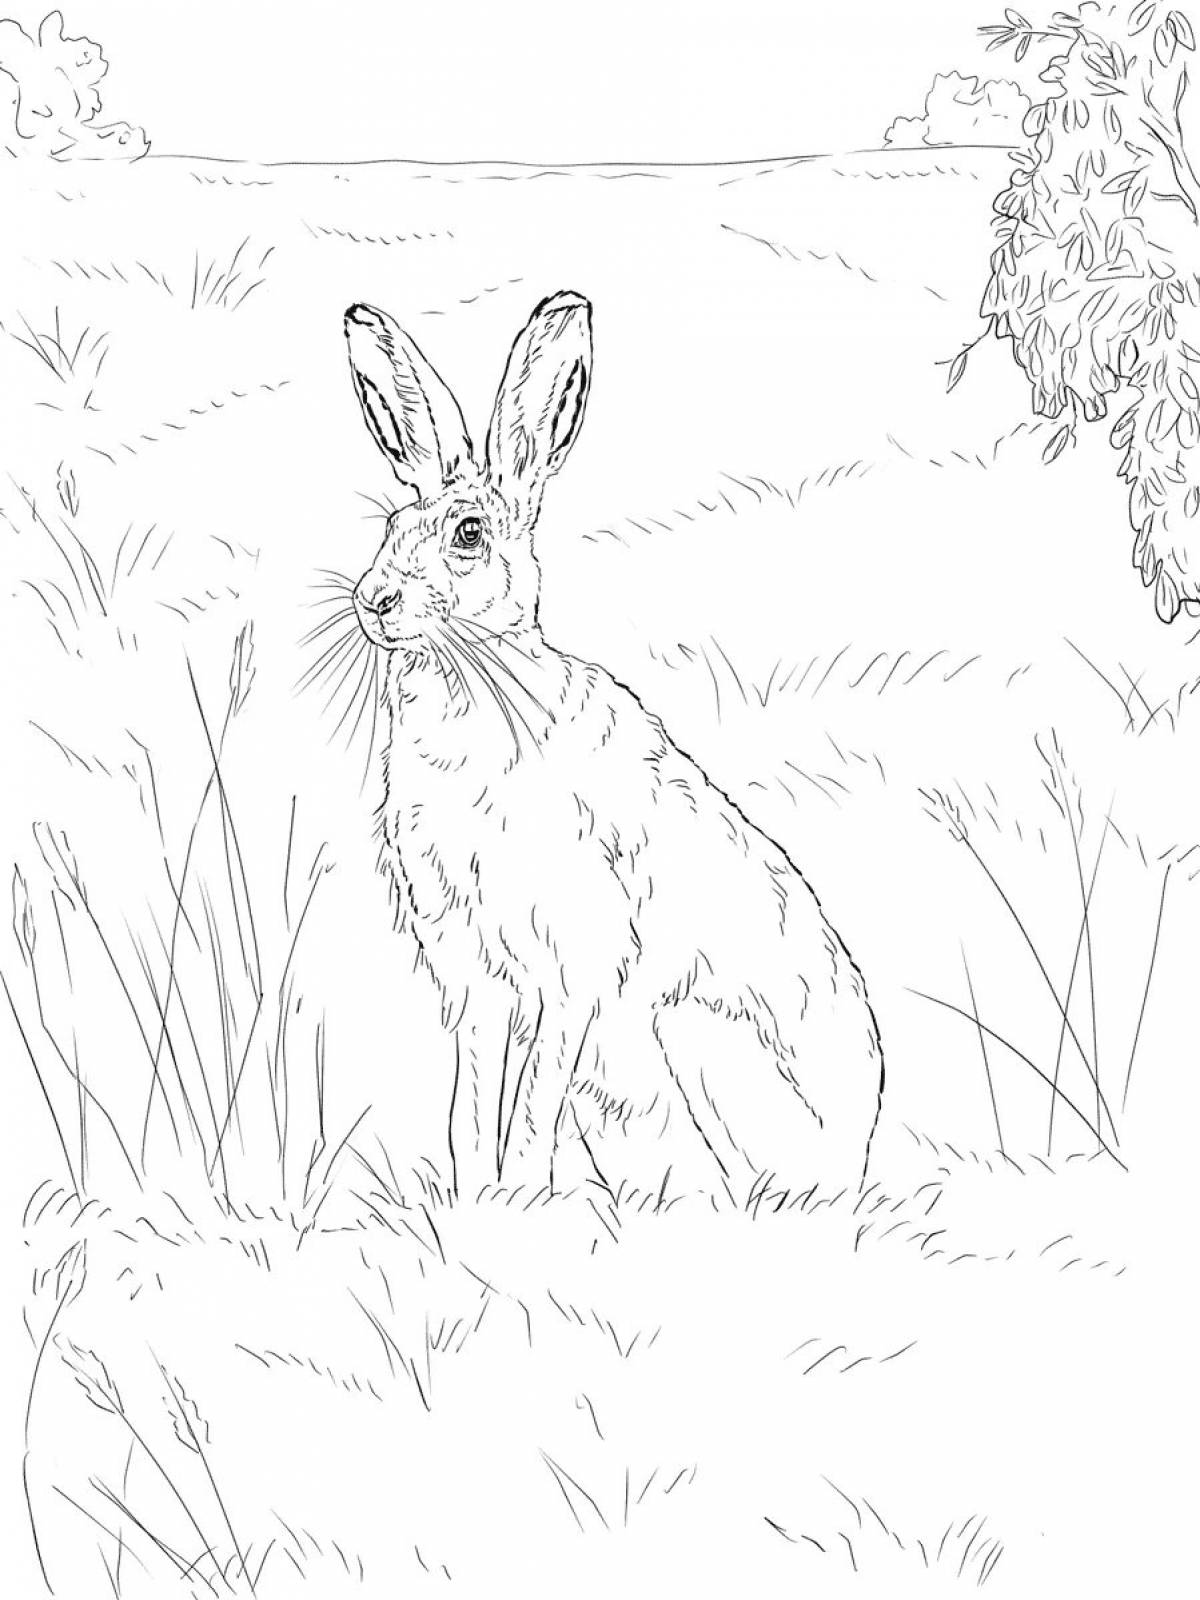 Hunters and hares #3